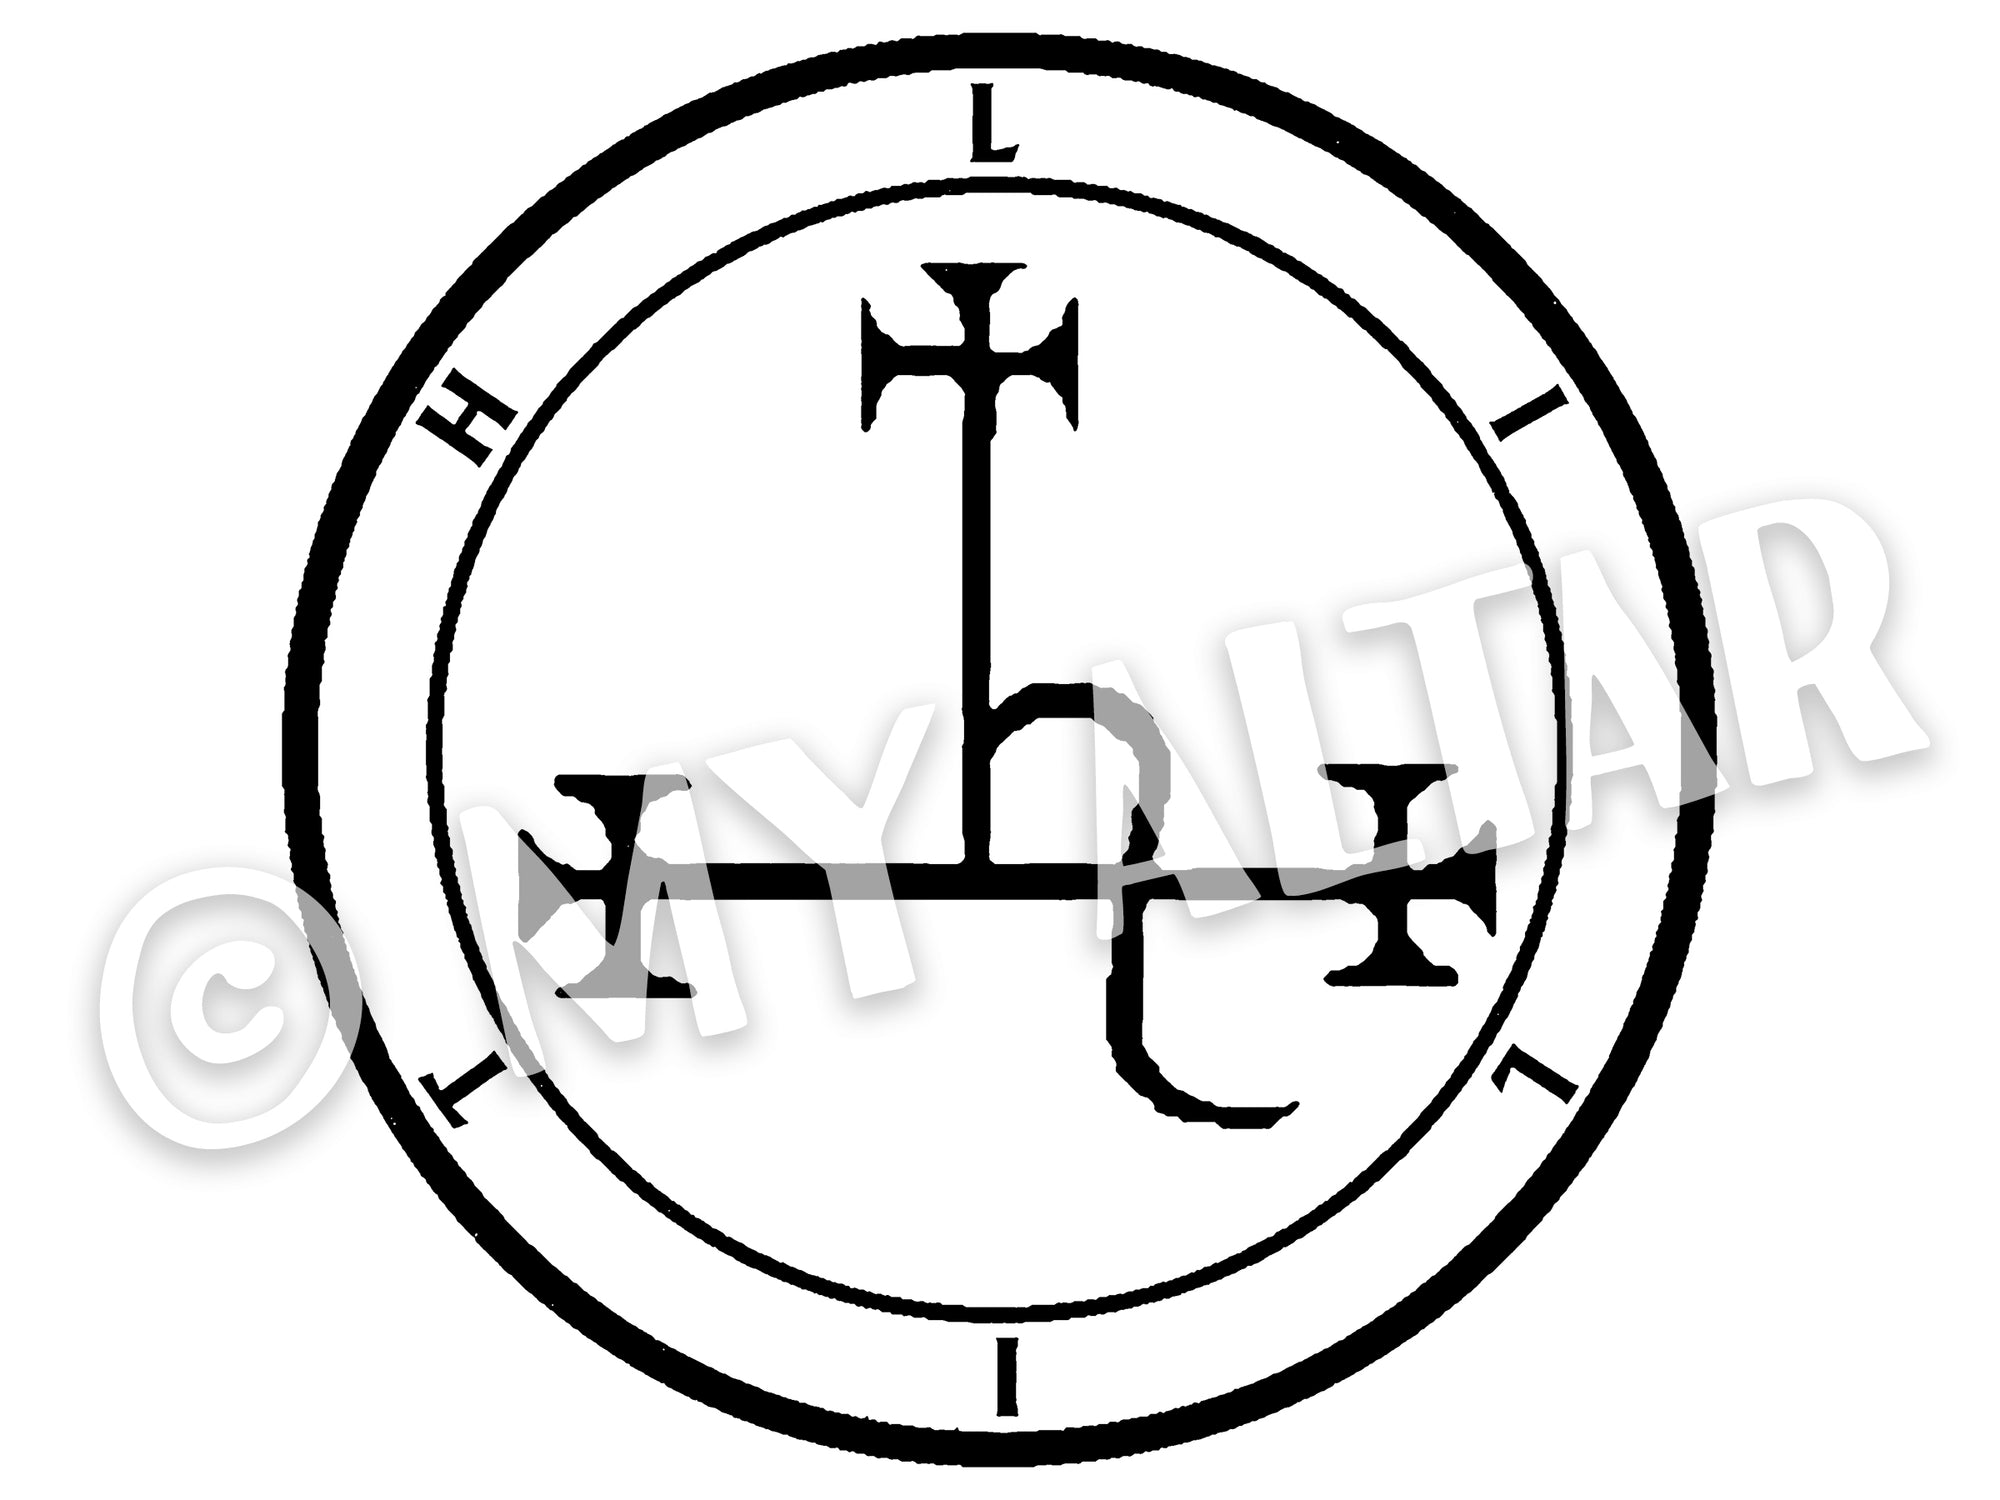 Set of 2 Large 5" Lilith Invocation Sigil Waterproof Temporary Tattoos